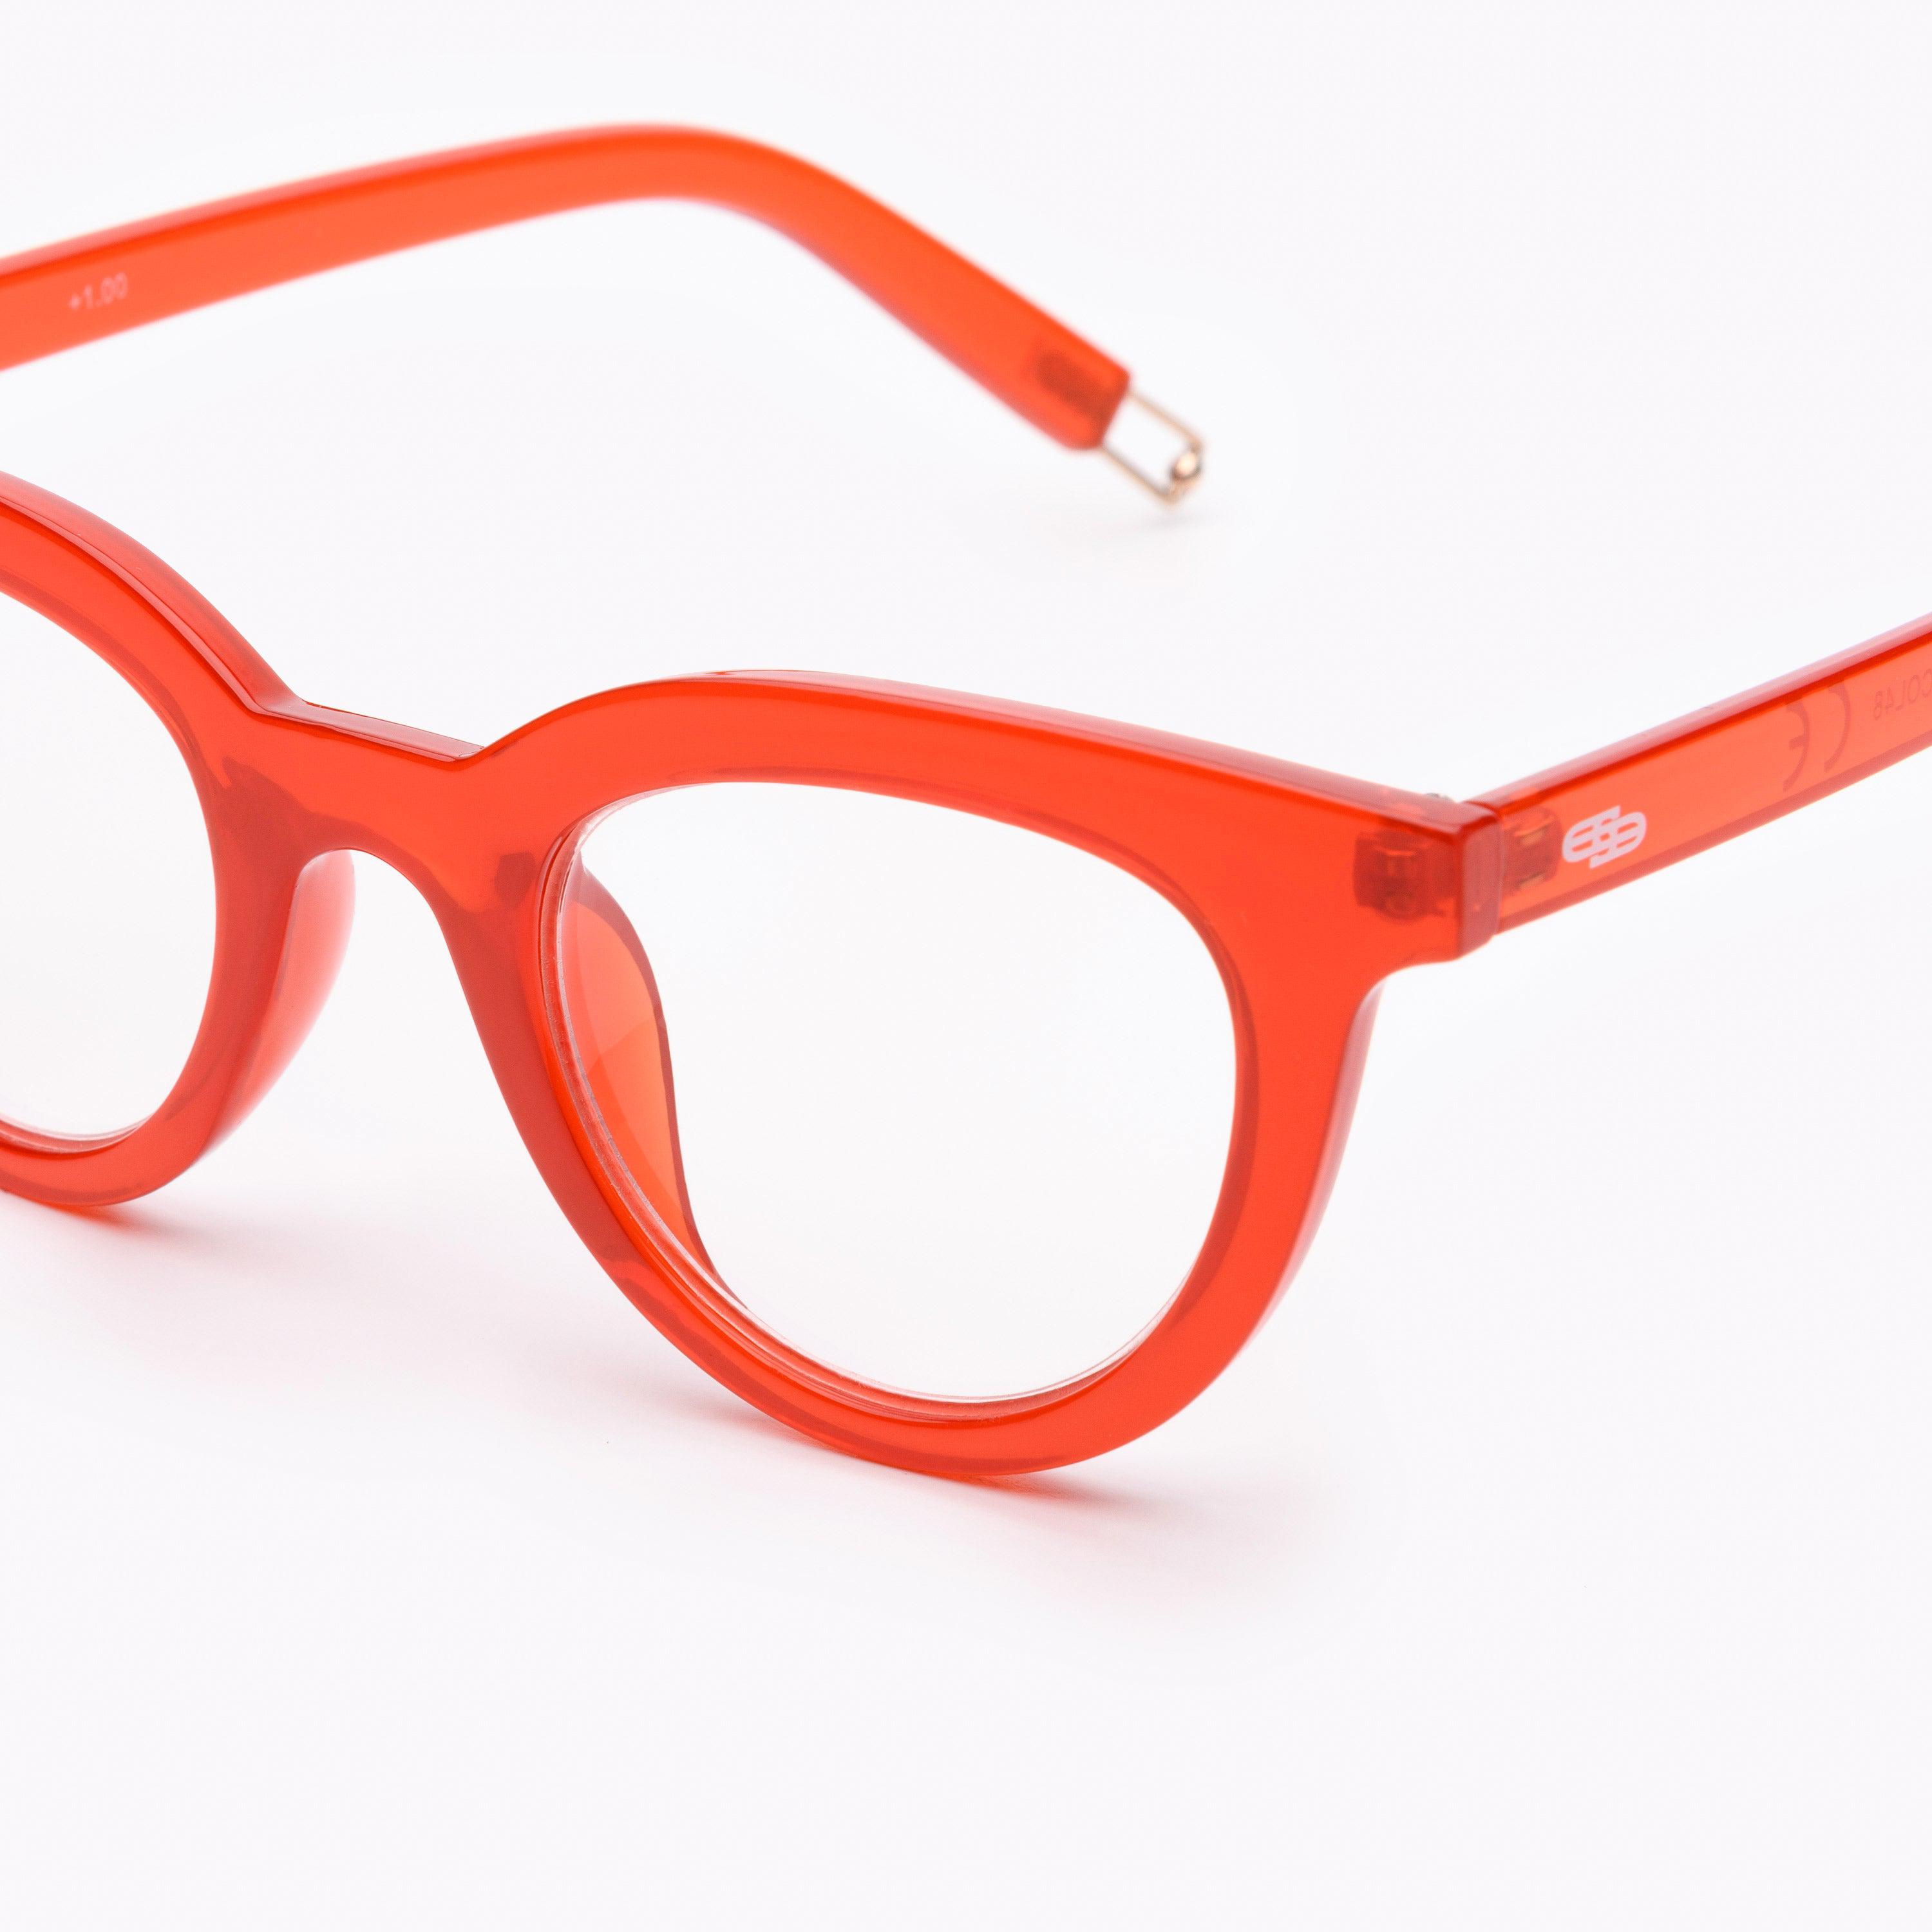 Red butterfly reading glasses